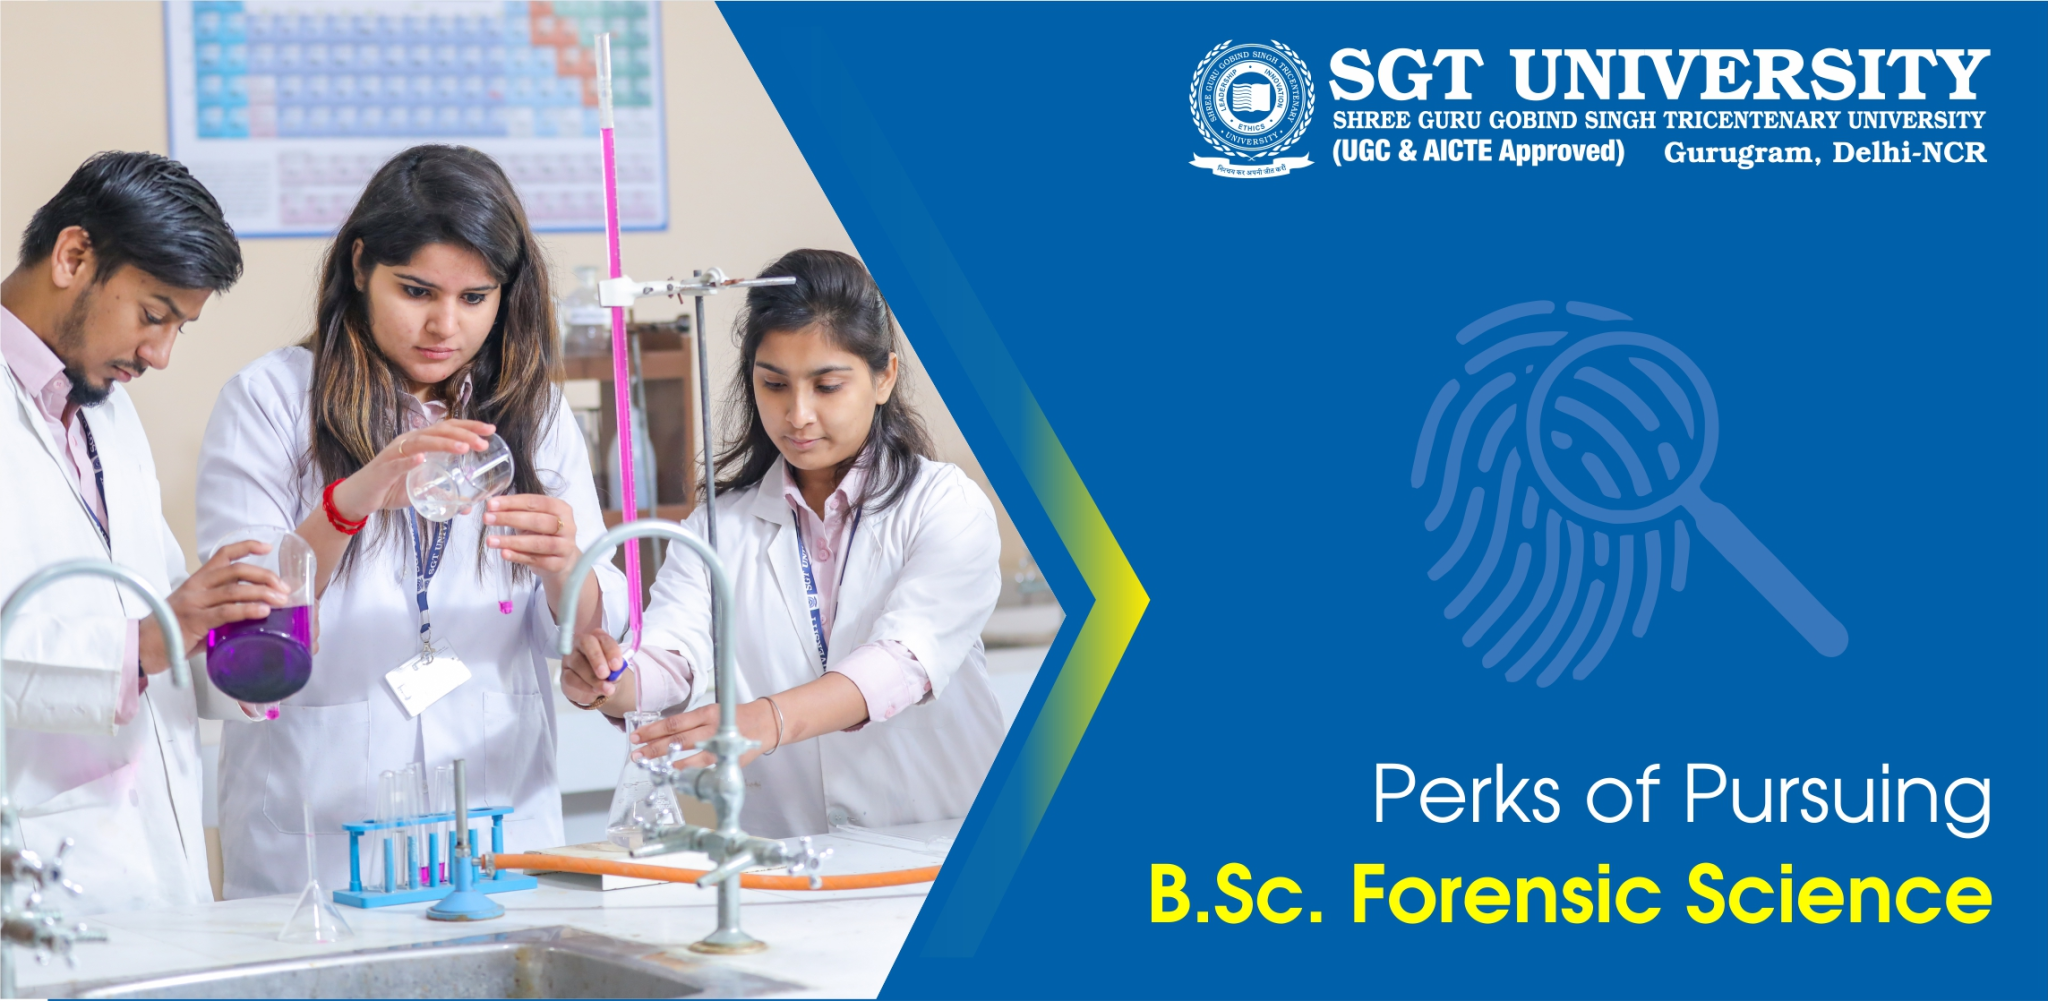 Pursuing B.Sc. Forensic Science